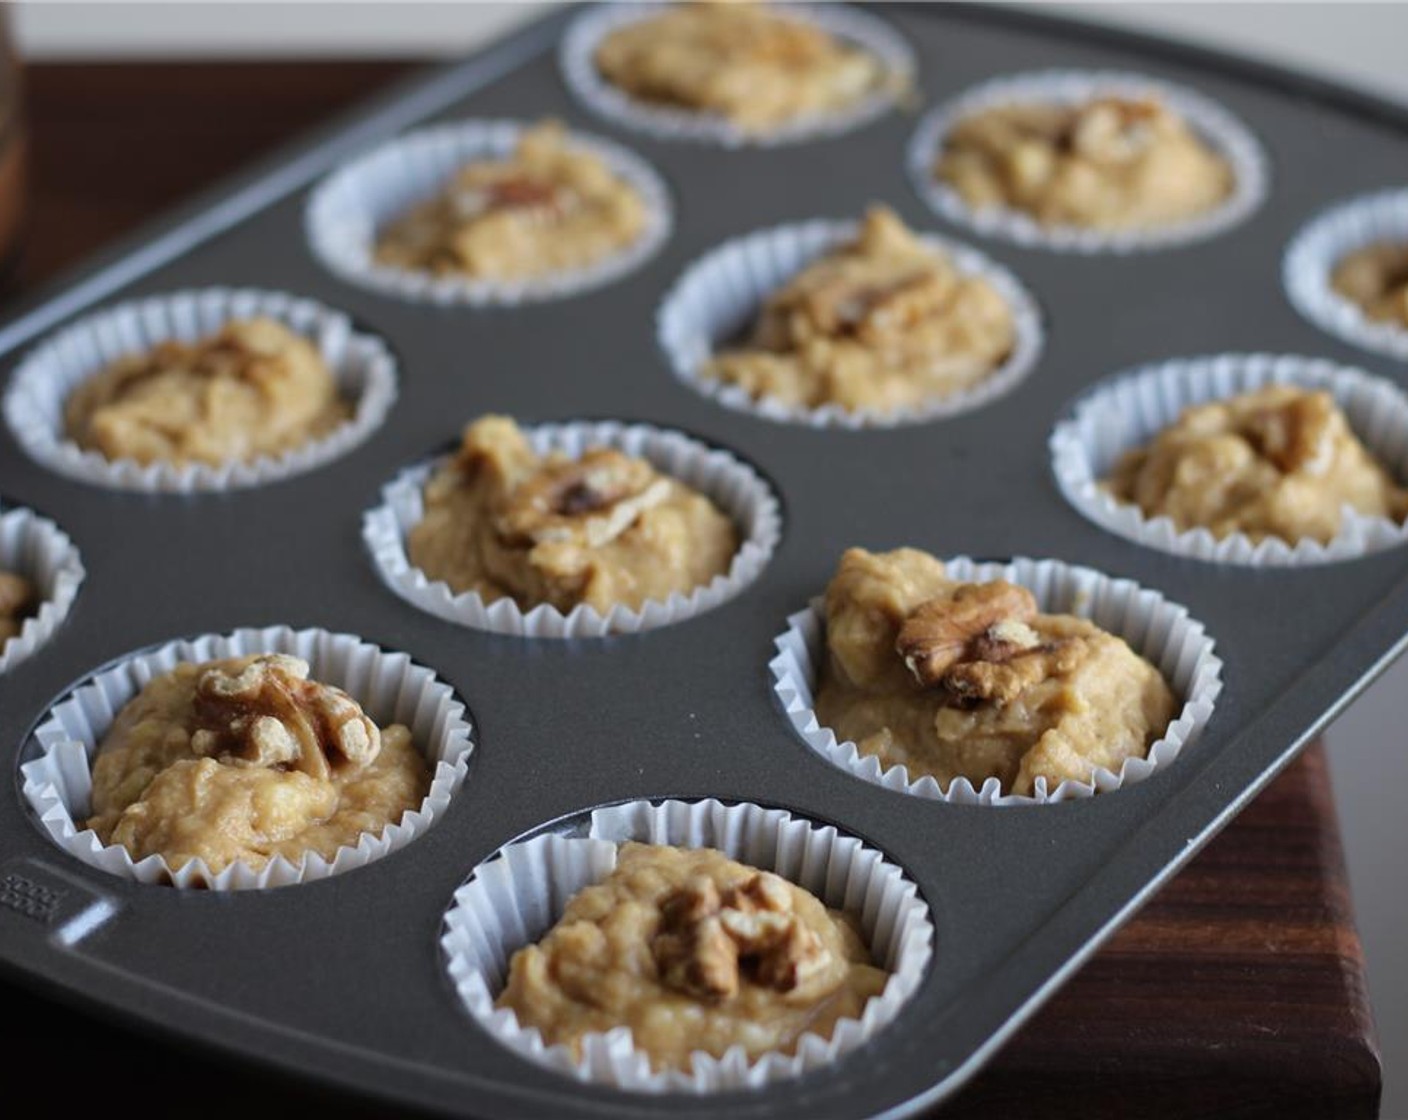 step 5 Pour into muffin tins. Top each muffin with a walnut. Bake for 20-25 minutes. Enjoy!